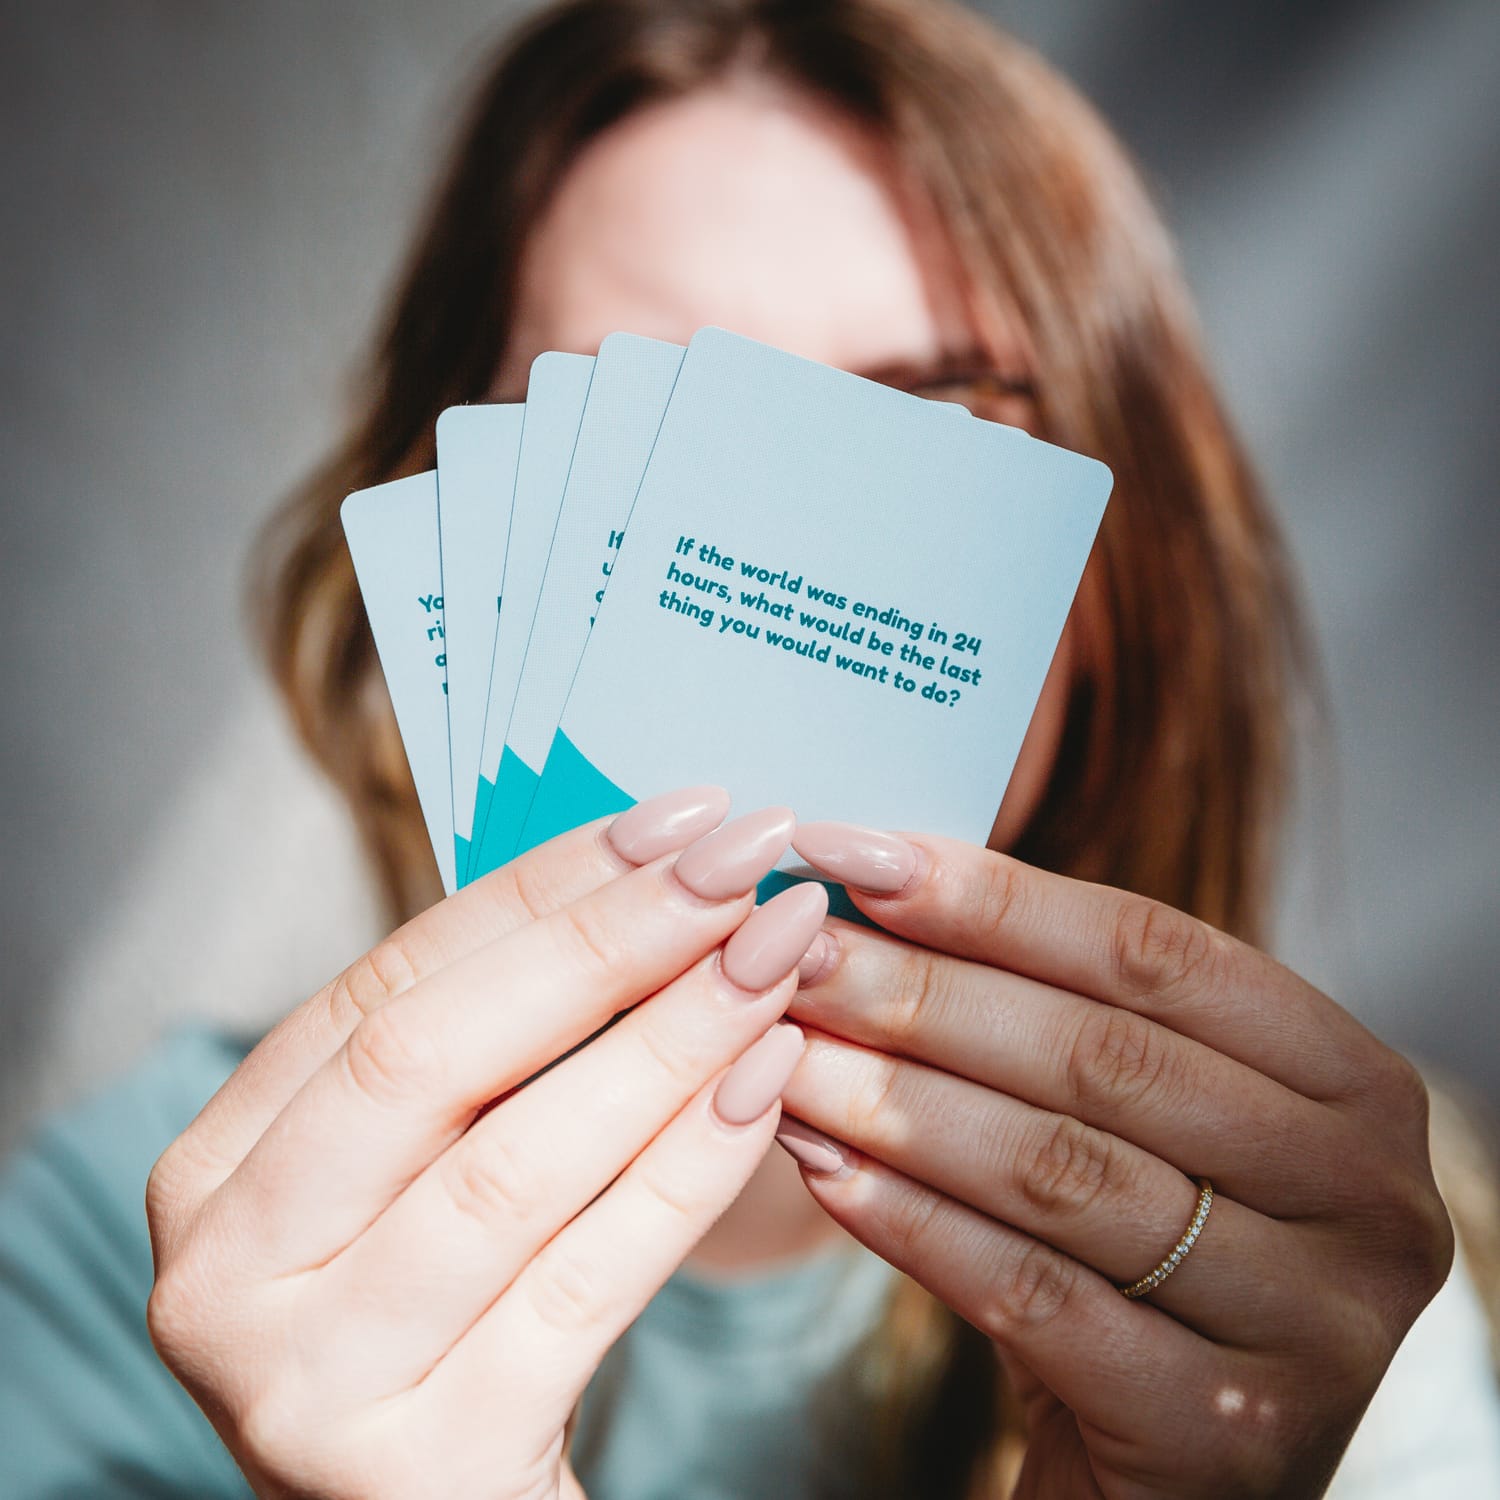 Girl holding cards from 141 Outrageous Conversation Starters for Couples card game